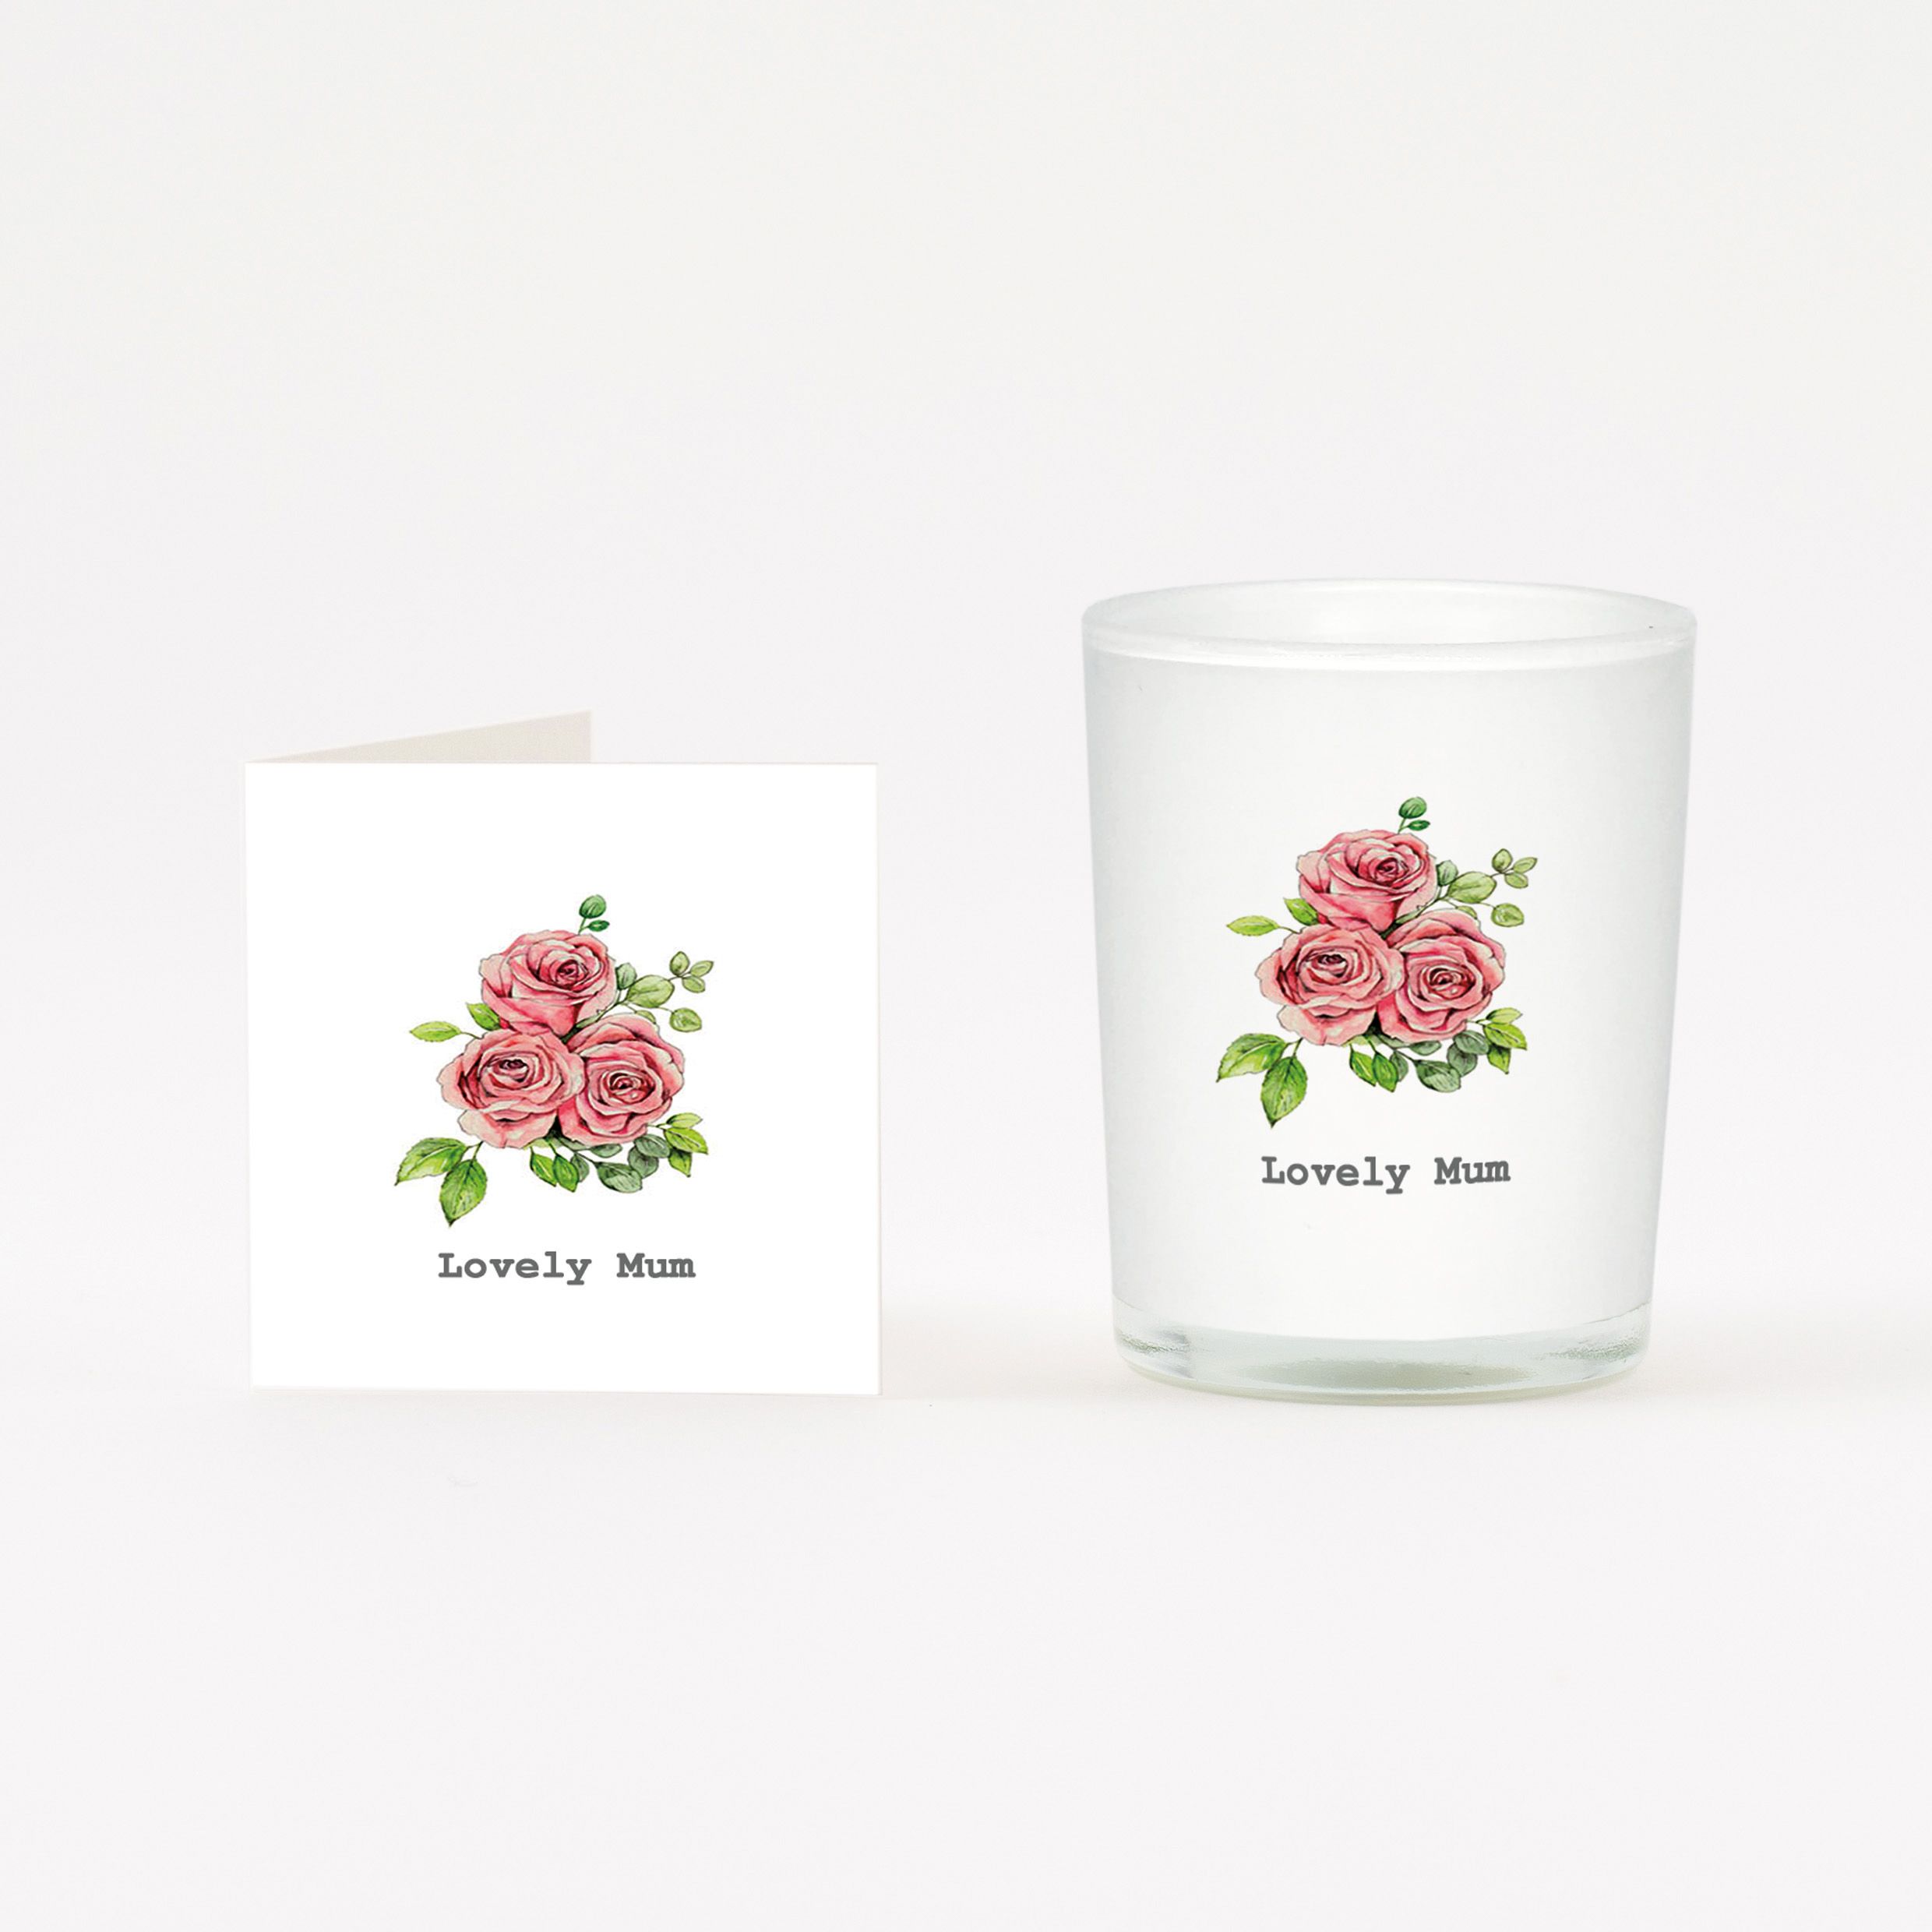 Boxed Scented Candle with Greeting Card